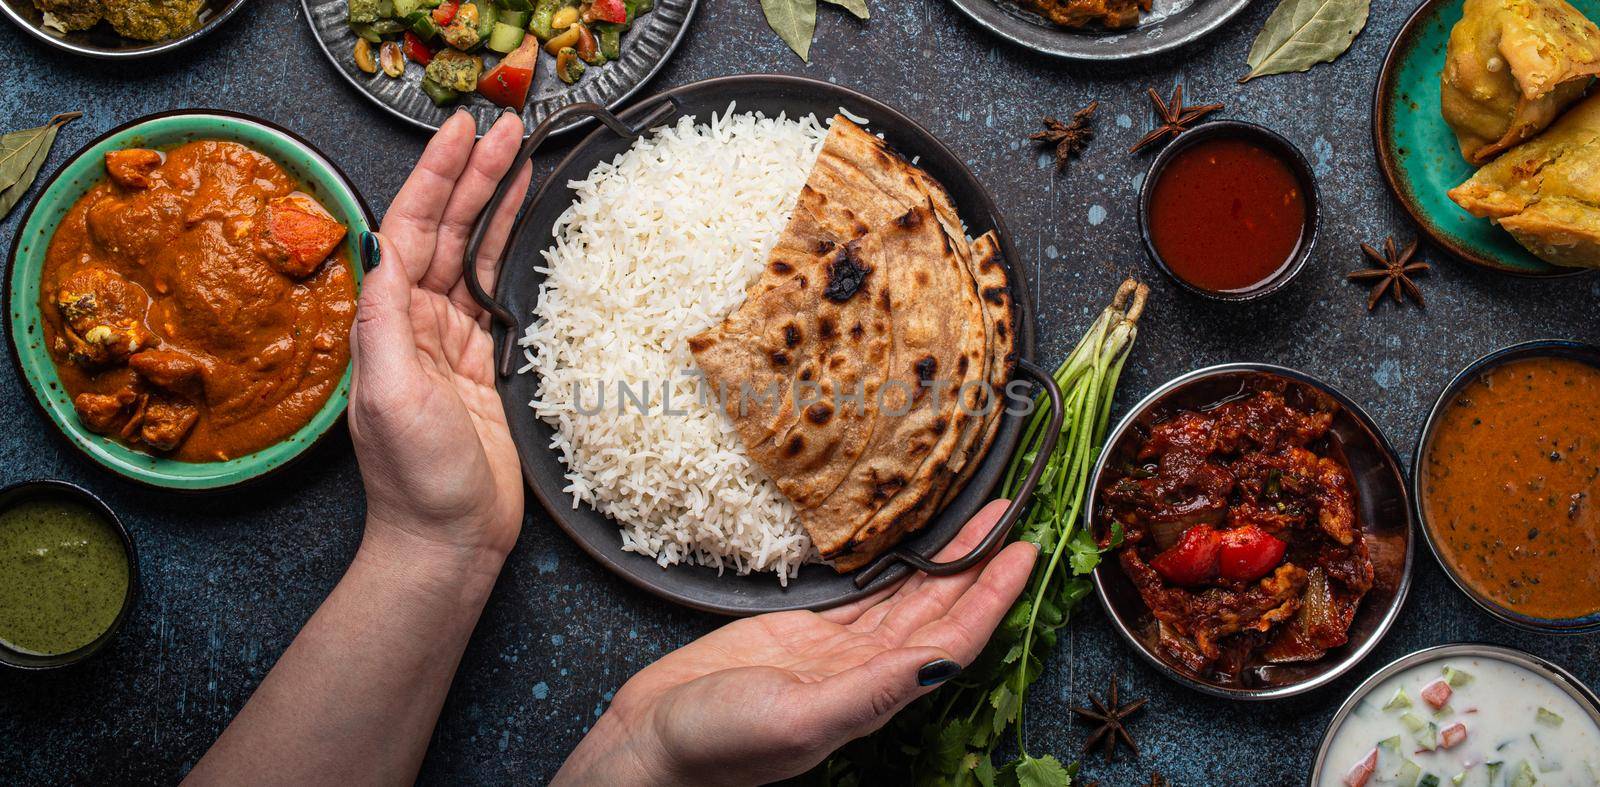 Female hands serving Indian ethnic food buffet on rustic concrete table by its_al_dente